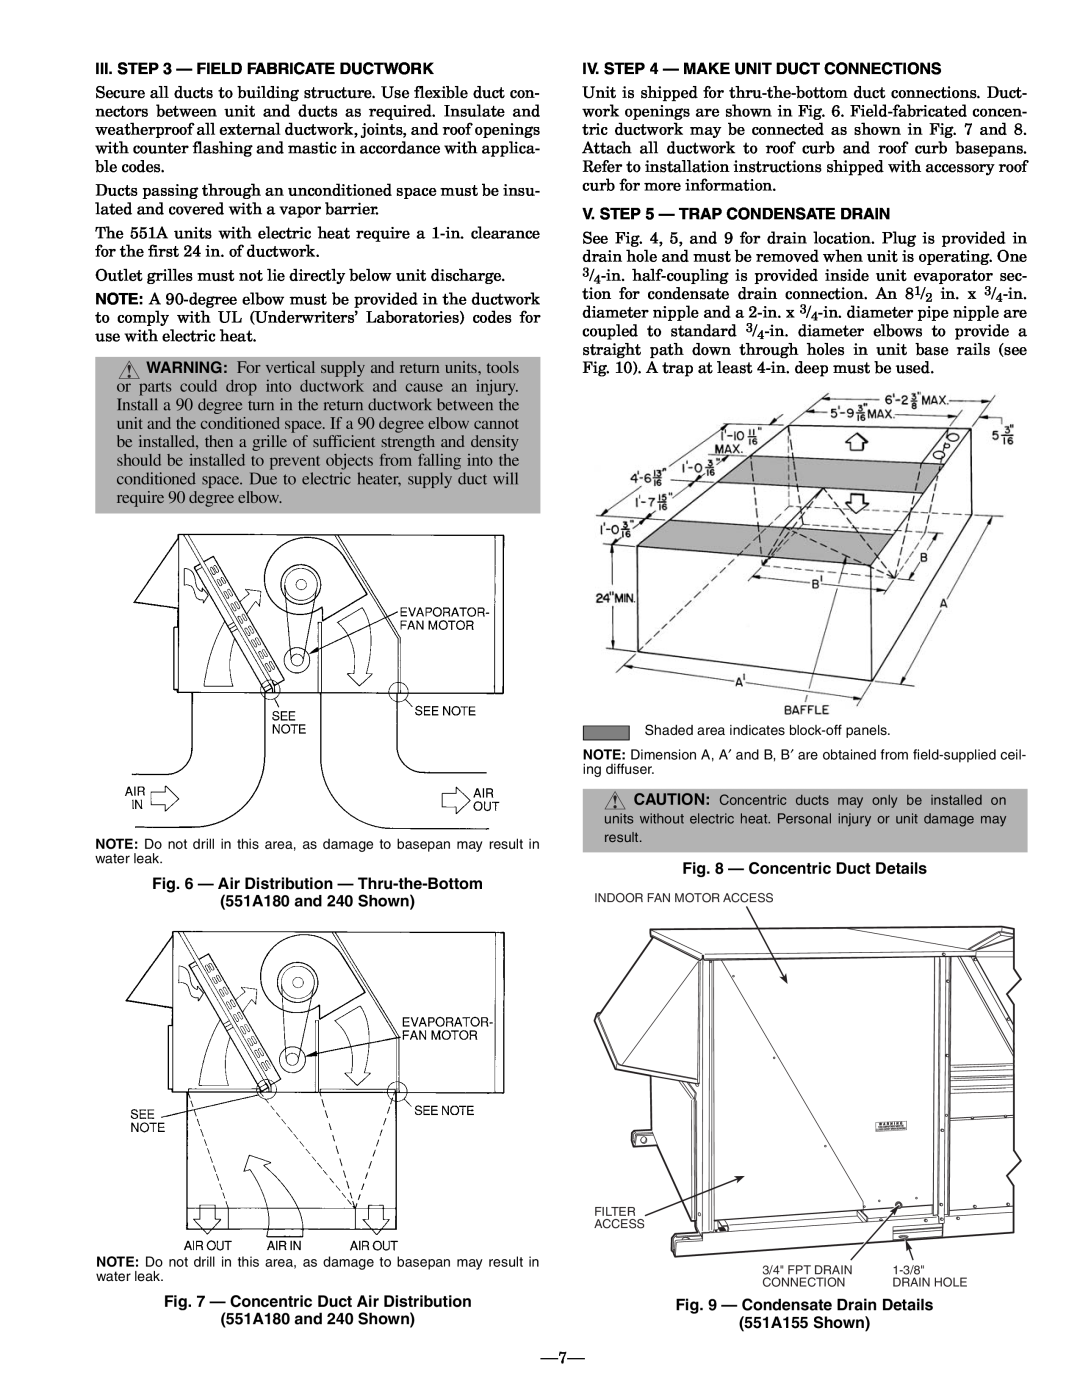 Bryant 551A operation manual Iii. — Field Fabricate Ductwork, Iv. — Make Unit Duct Connections, V. — Trap Condensate Drain 